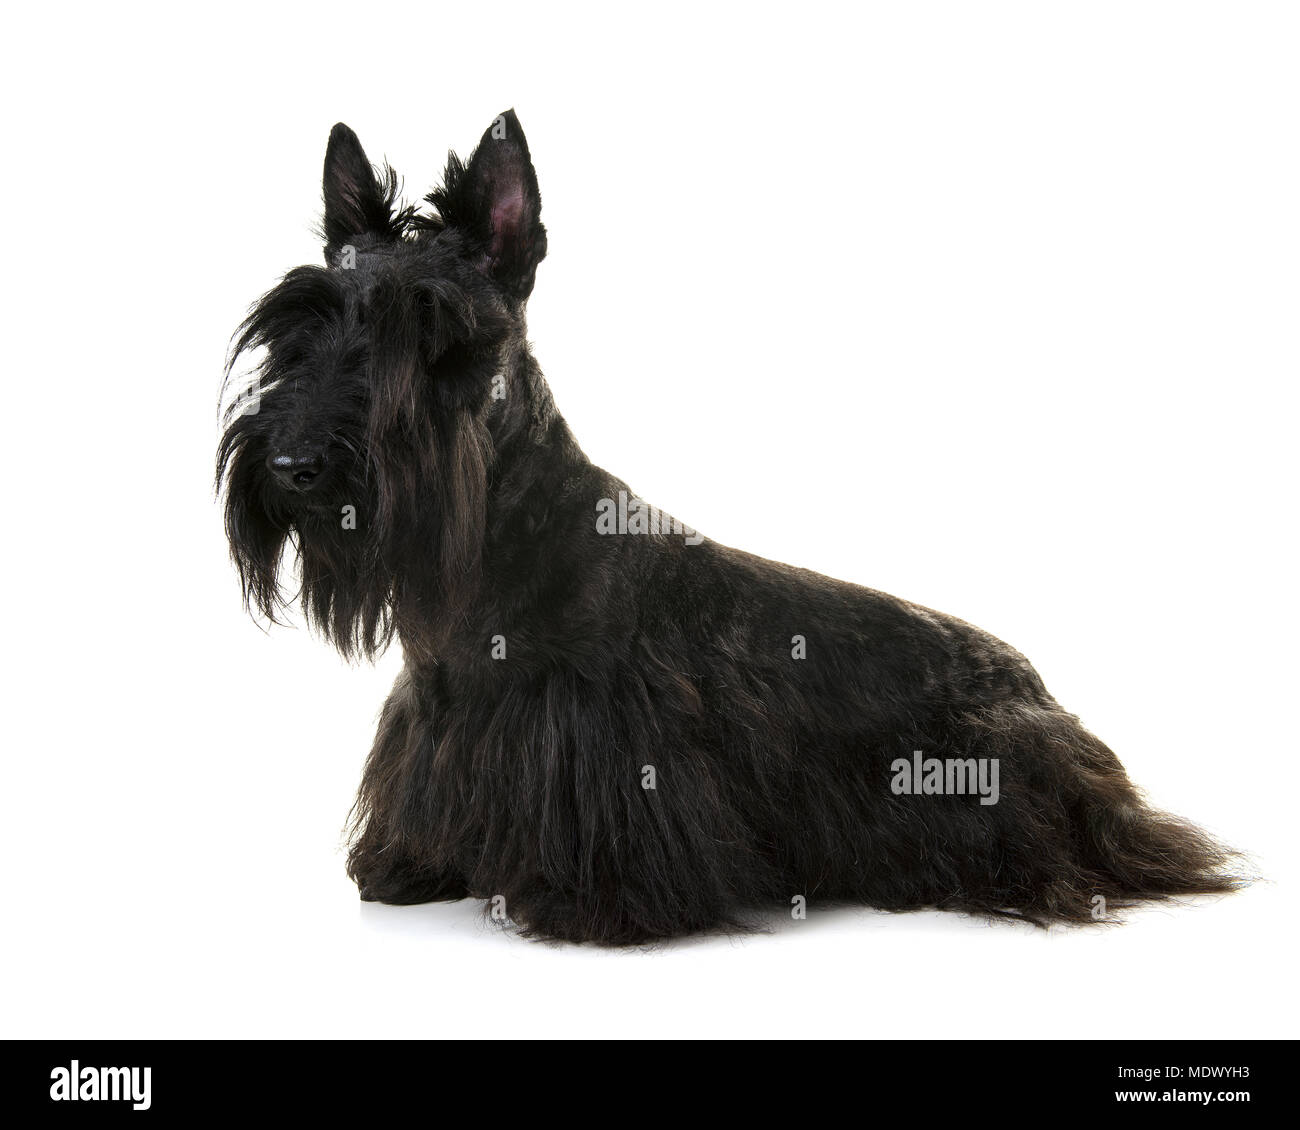 Black scottisch terrier seen from the side isolated on a white background Stock Photo